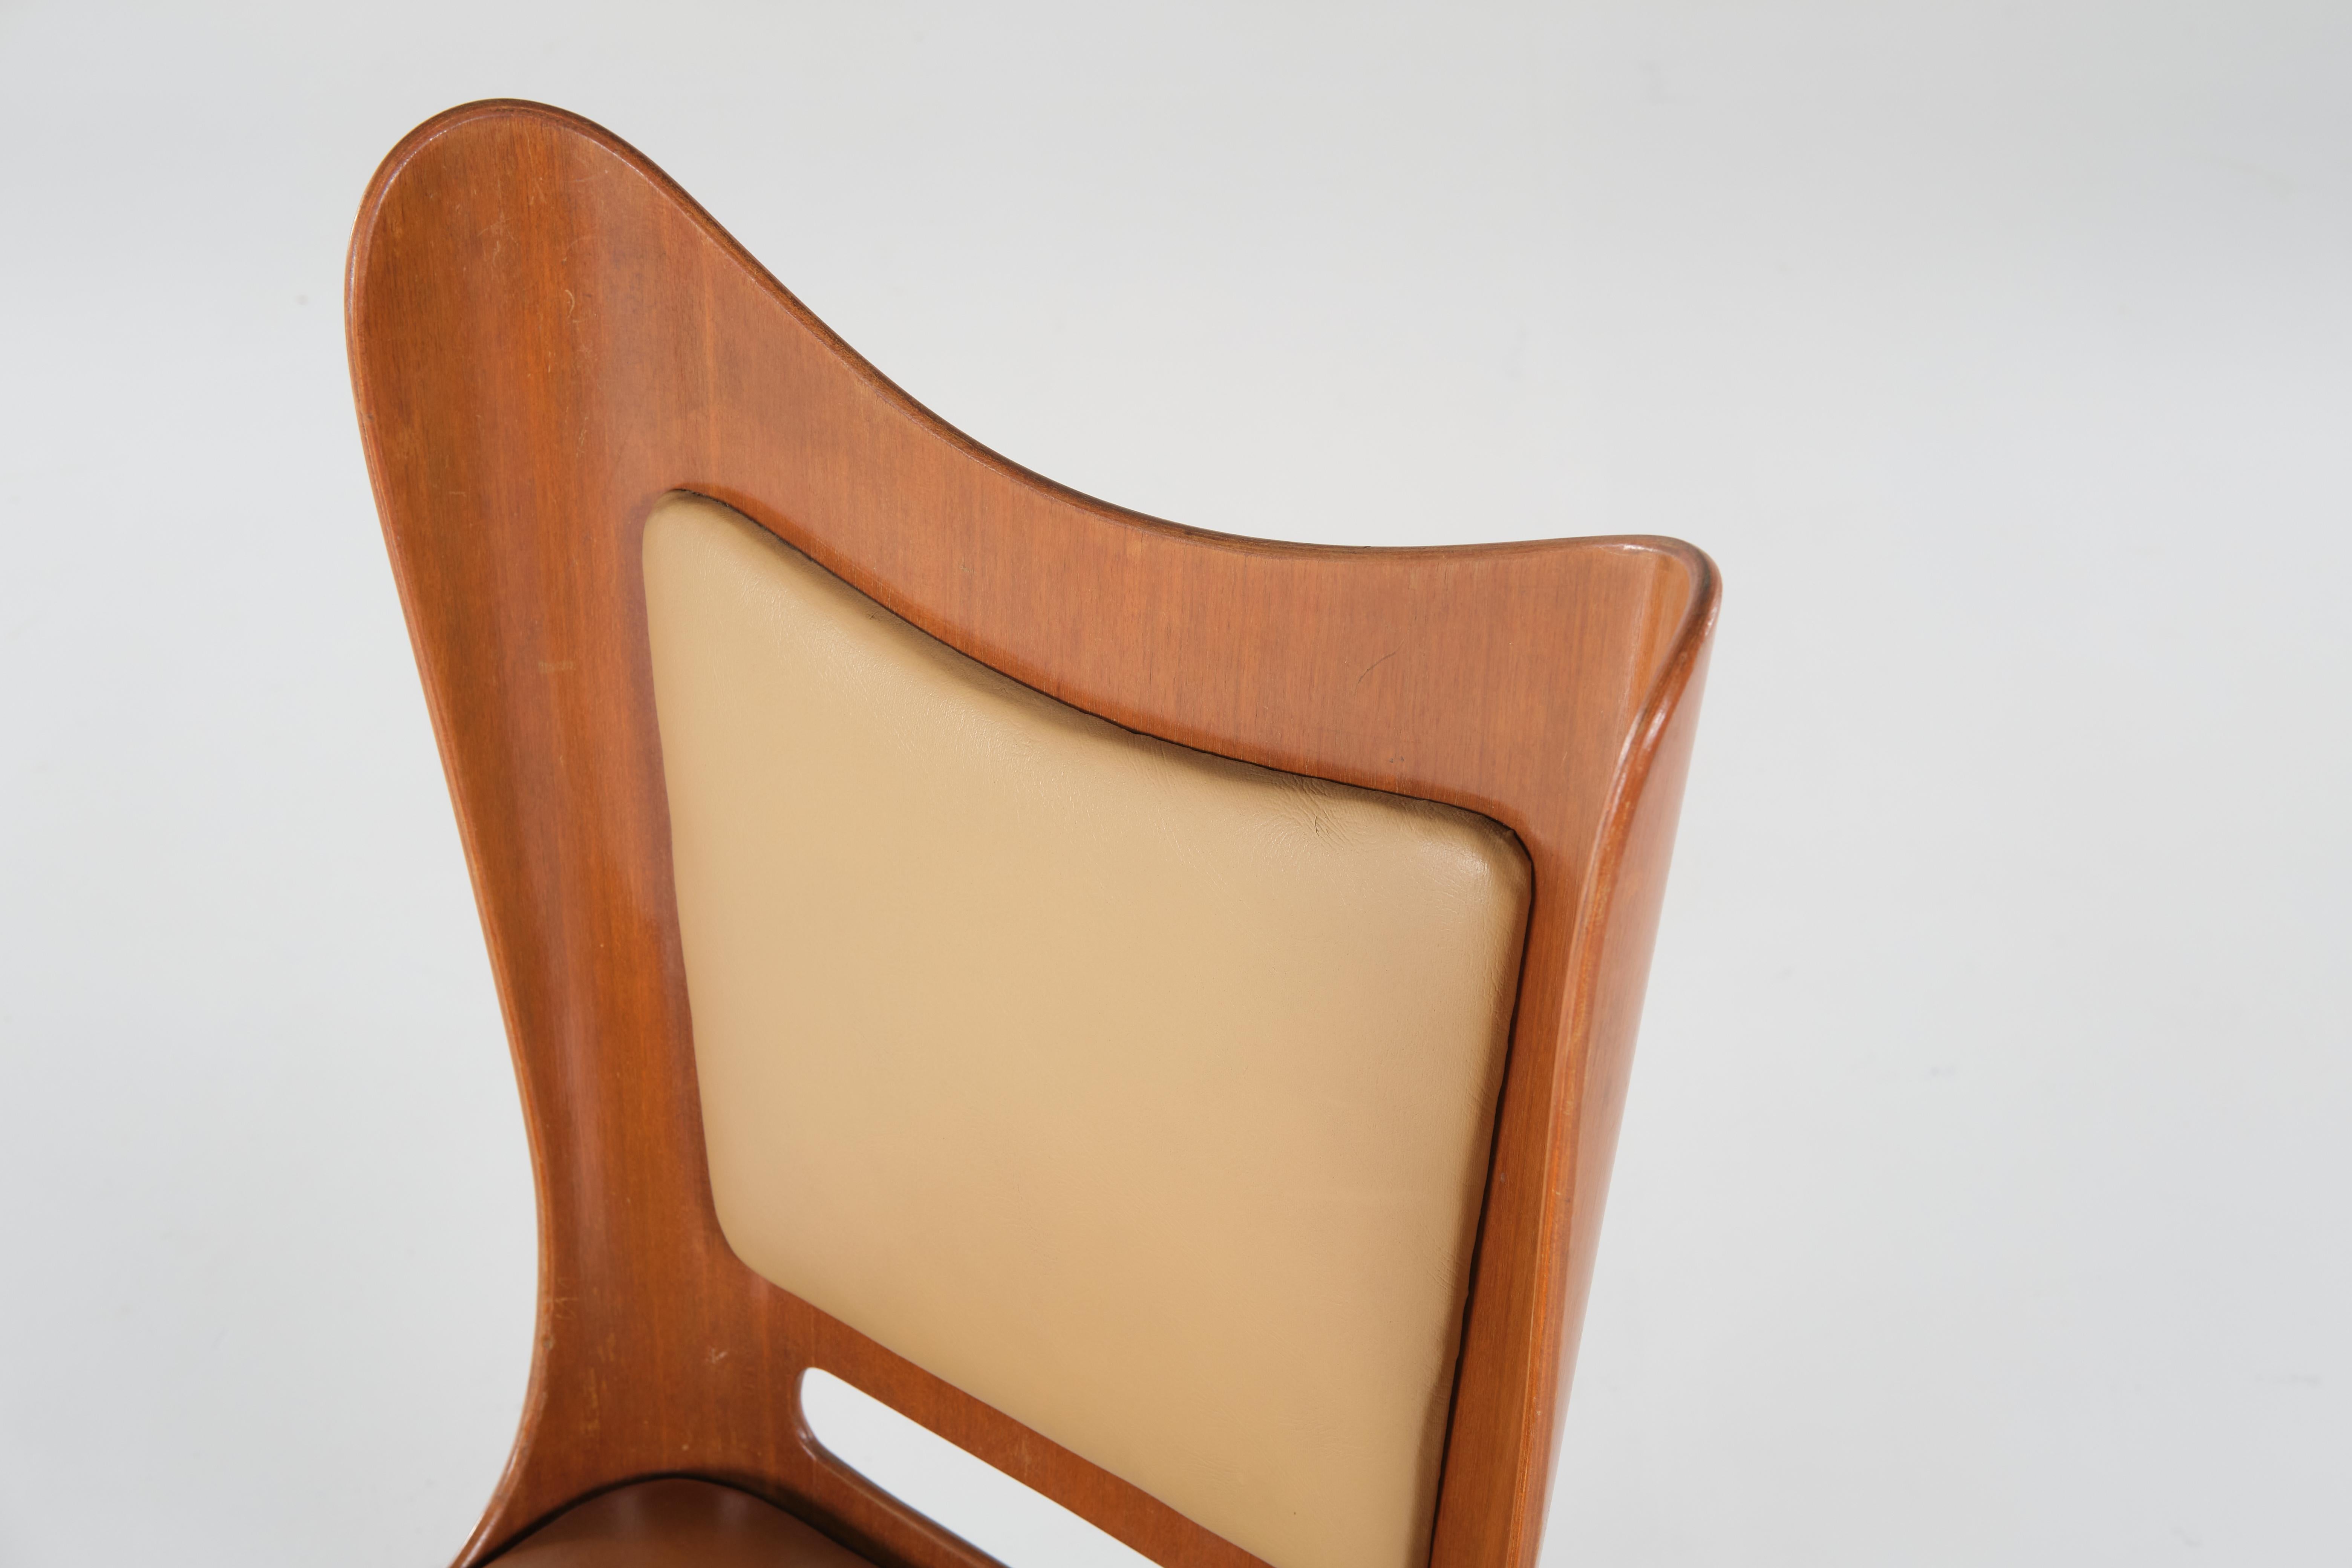 Carlo Ratti Set of 6 Chairs Wood Plywood and Faux Leather, Italian Design 1950s For Sale 3